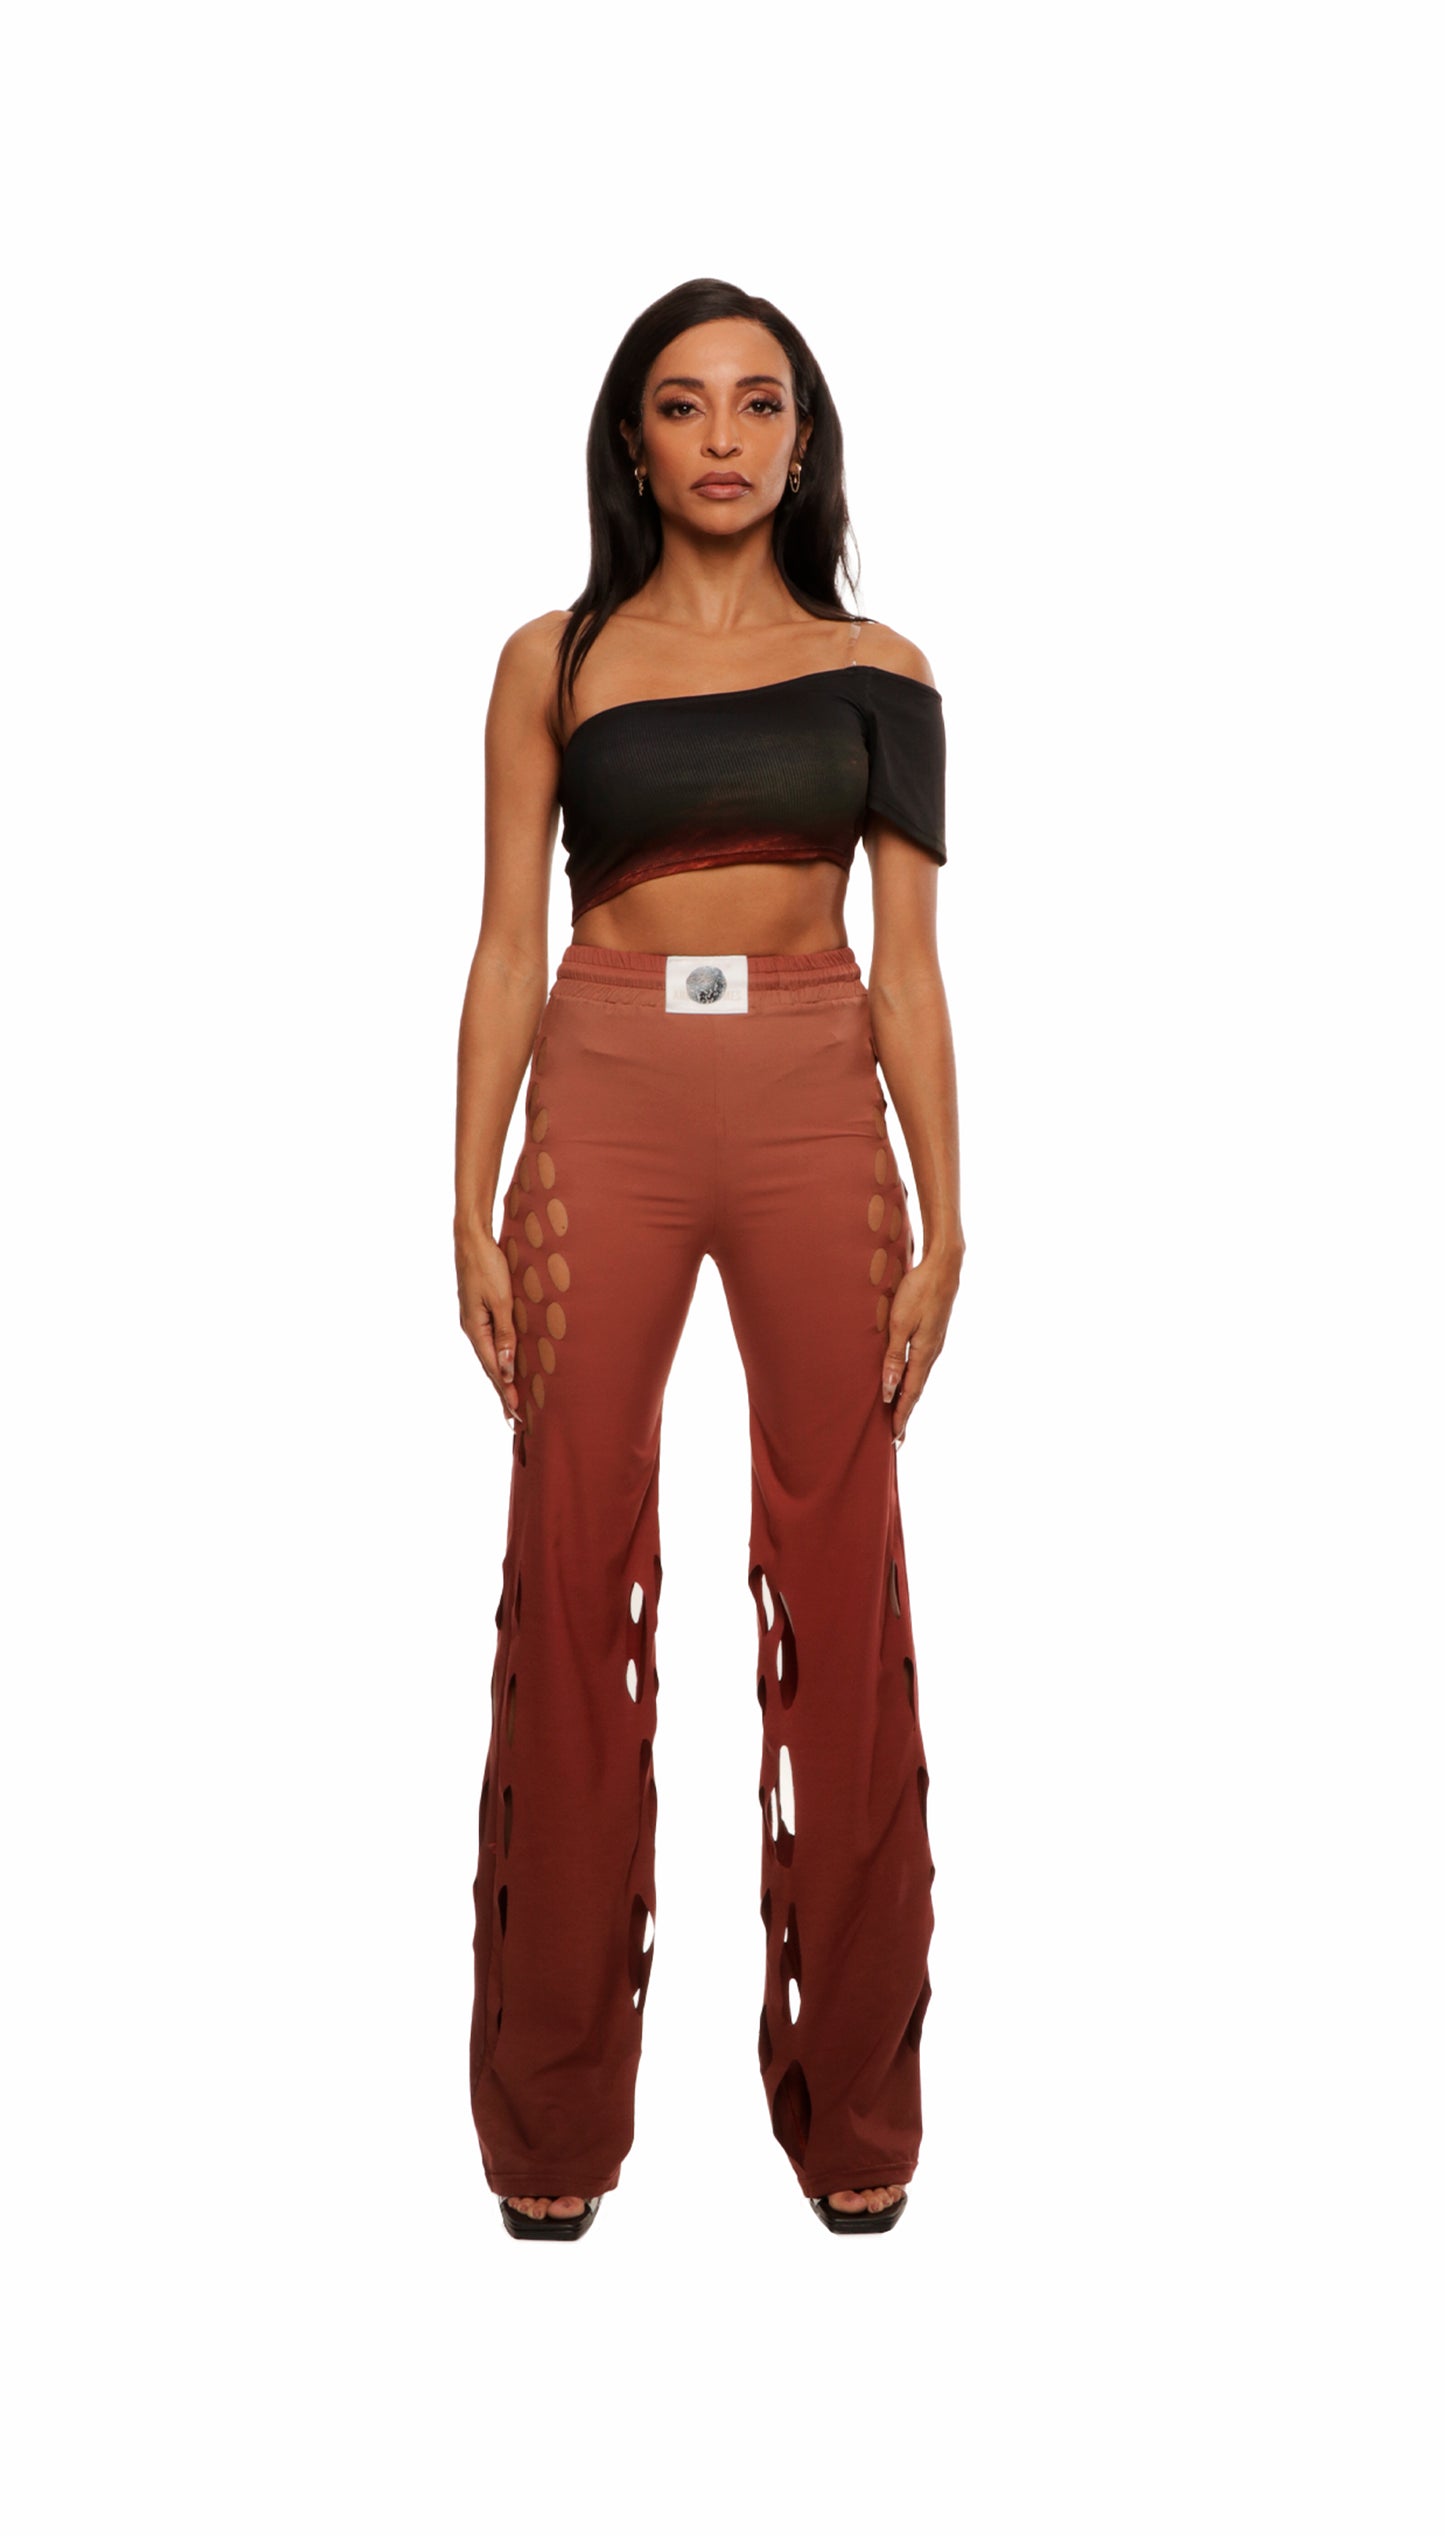 Woman who looks like Beyoncé or Aaliyah wears gradient brown toned asymmetrical top with clear strap, front view